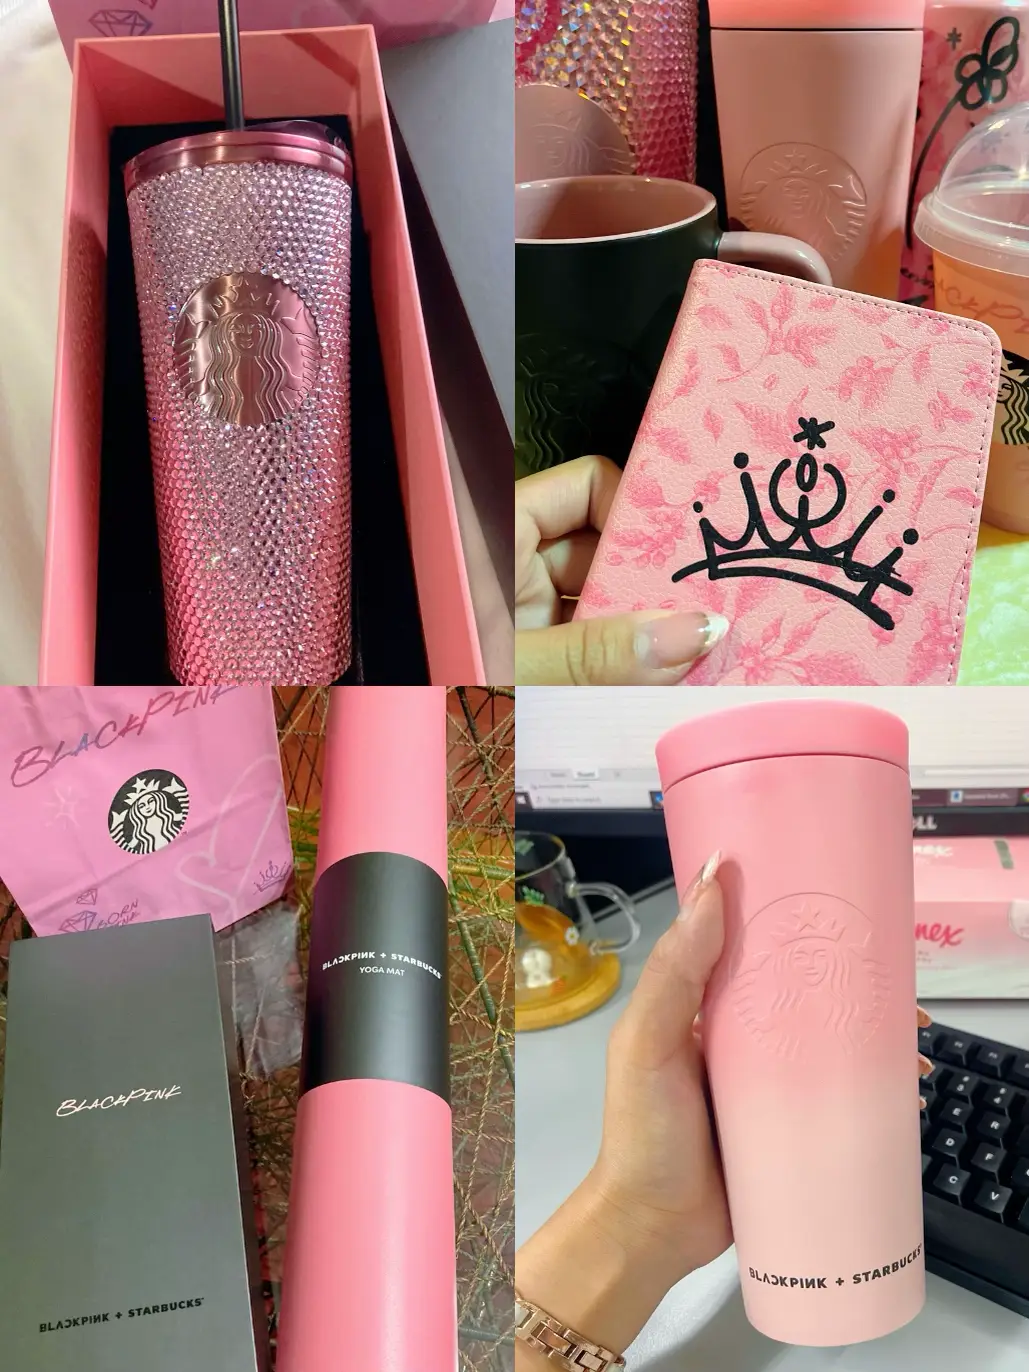 BLACKPINK Is Teaming Up With Starbucks to Launch Drink & Merch Items